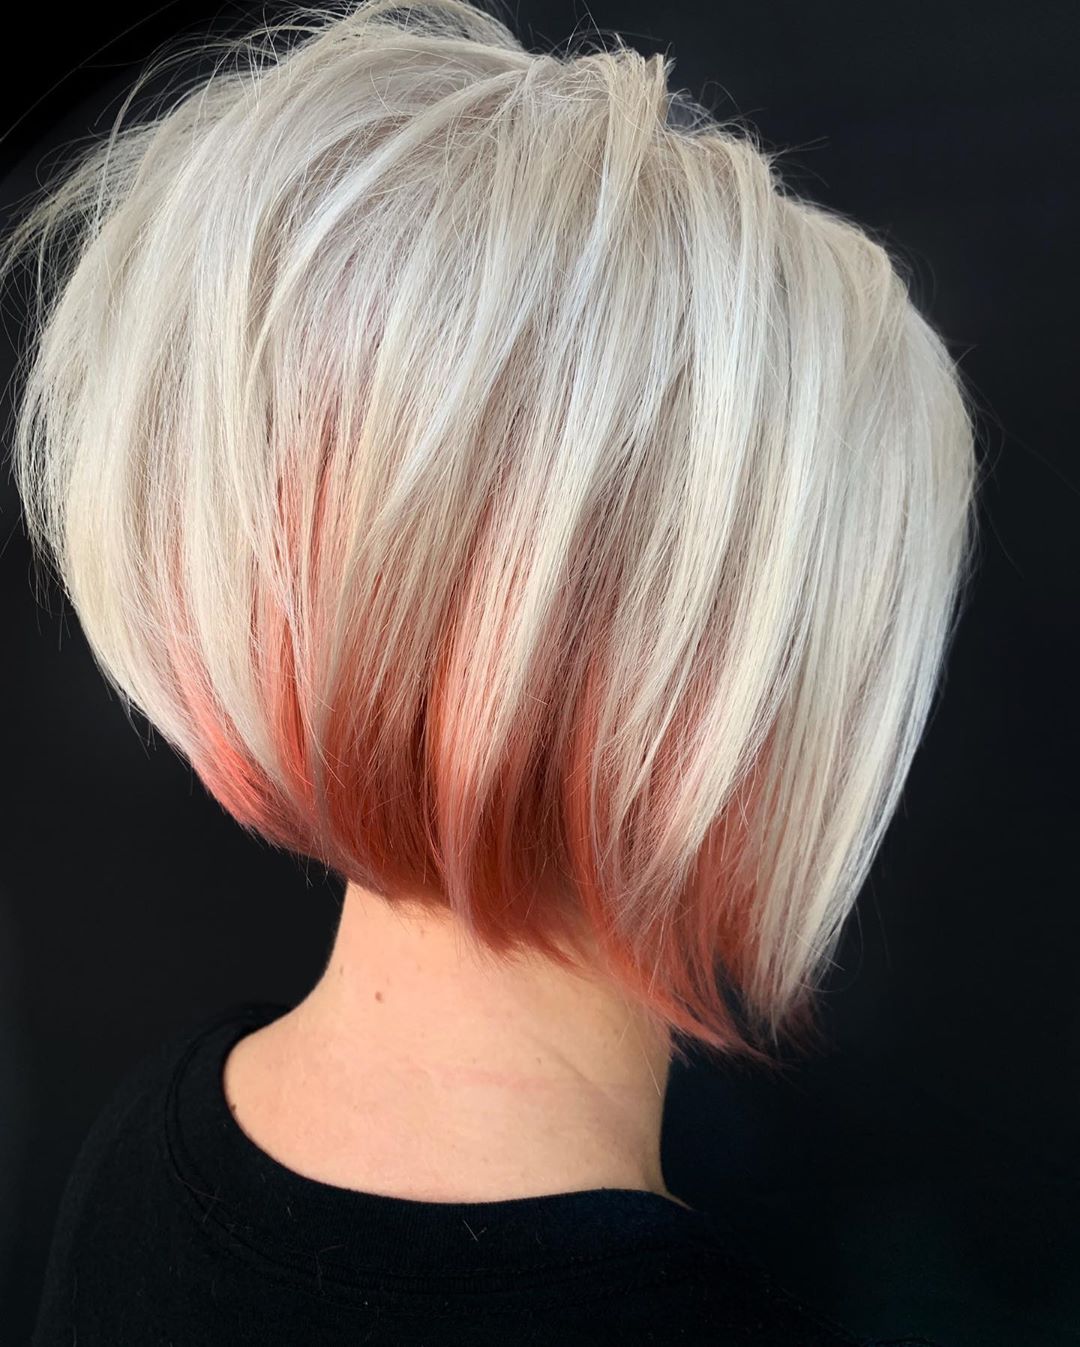 44 Creative Short hair color ideas 2021 for Trend in 2022